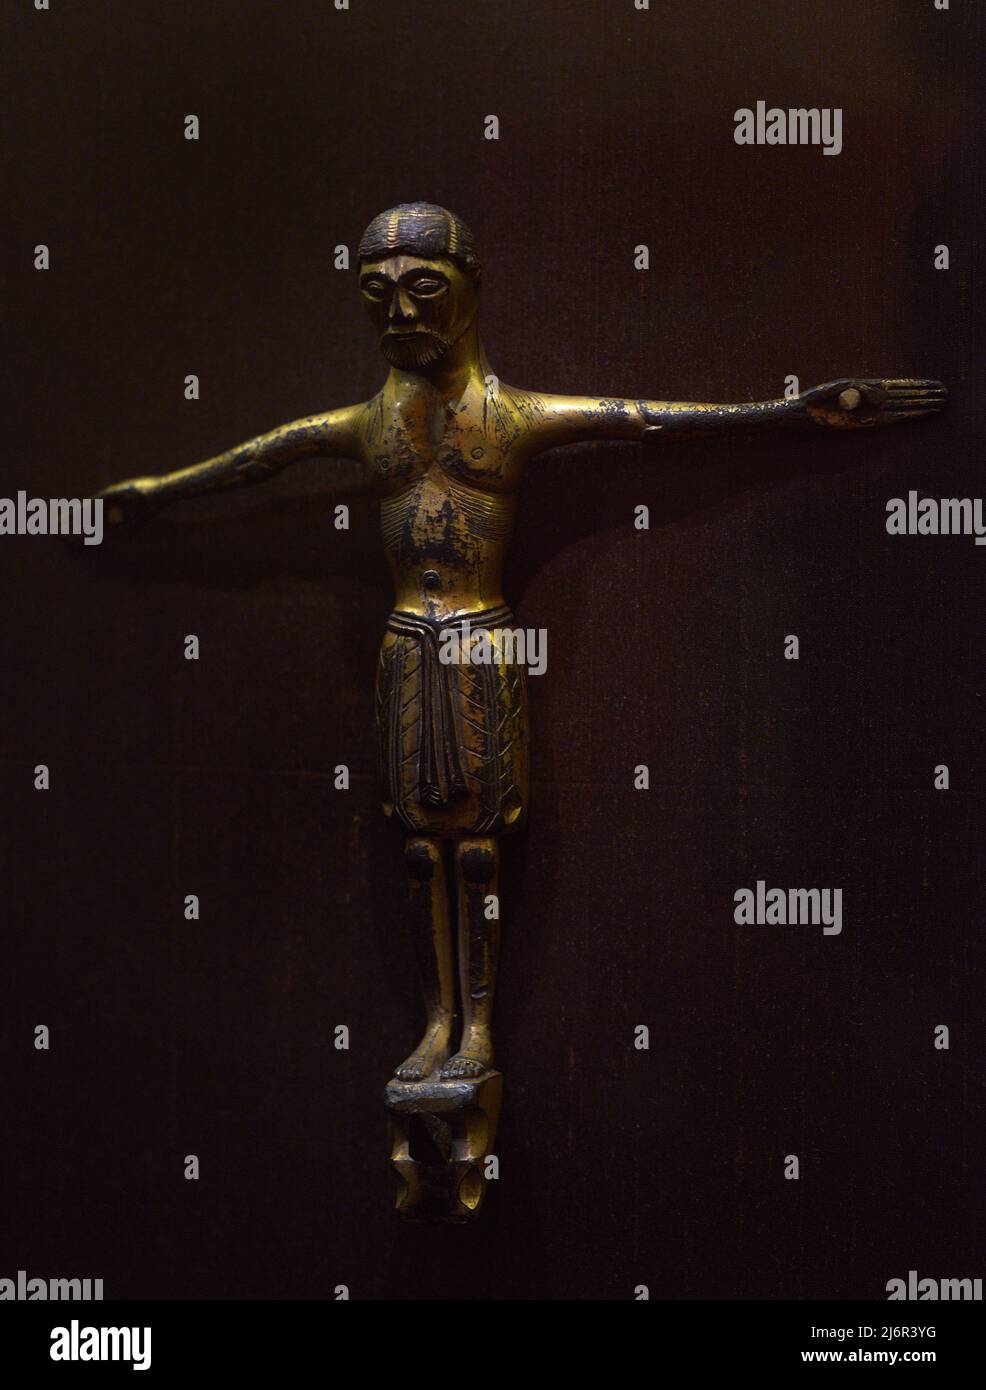 Christ. 12th century. Lombardy, Italy. Chased and gilded bronze. Calouste Gulbenkian Museum. Lisbon, Portugal. Stock Photo